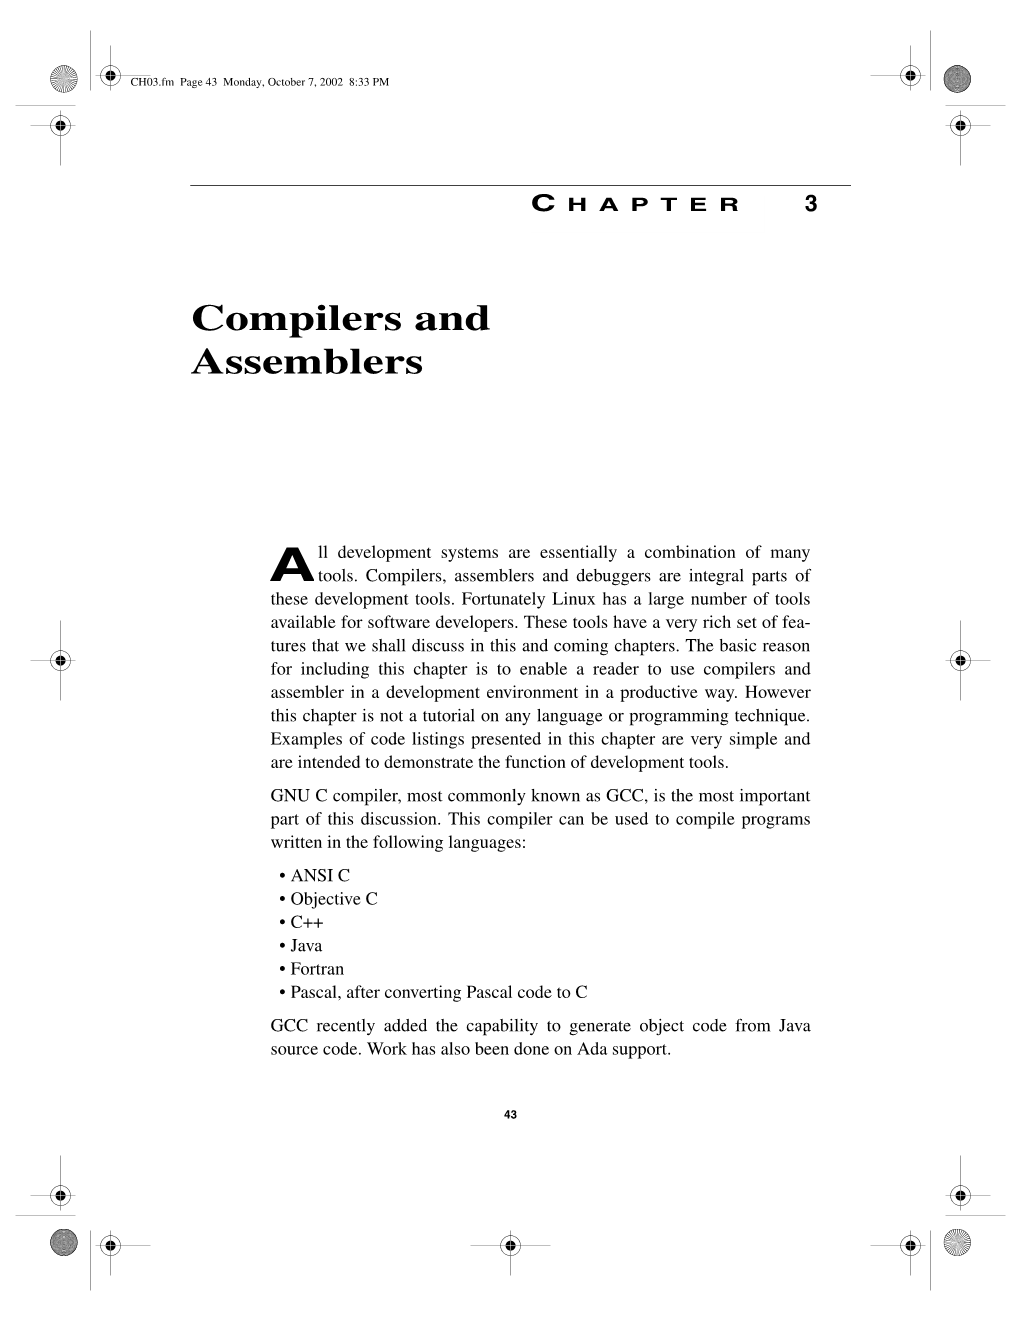 Compilers and Assemblers